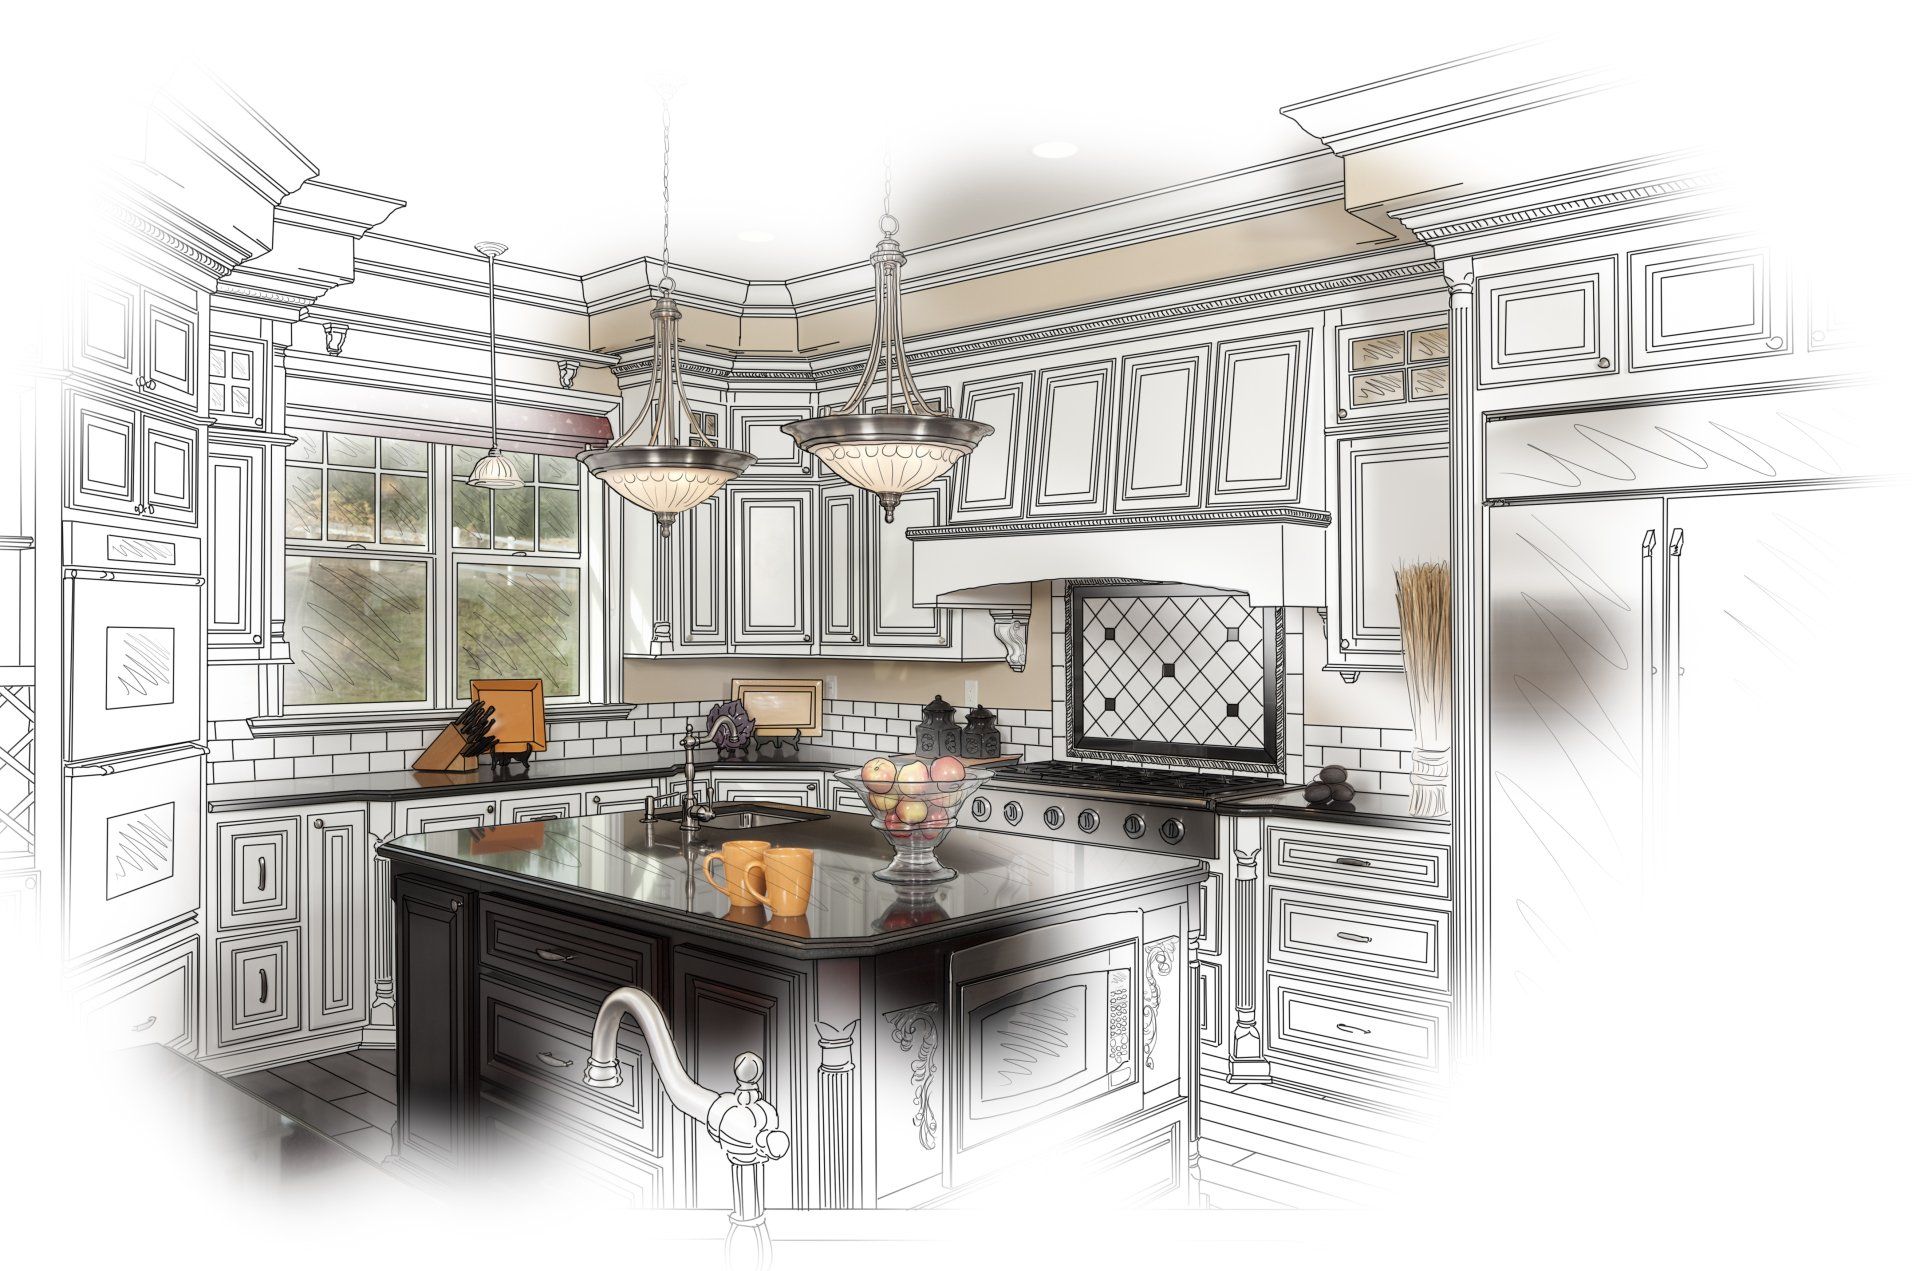 Top Gunn kitchen design helps you plan out your kitchen remodel